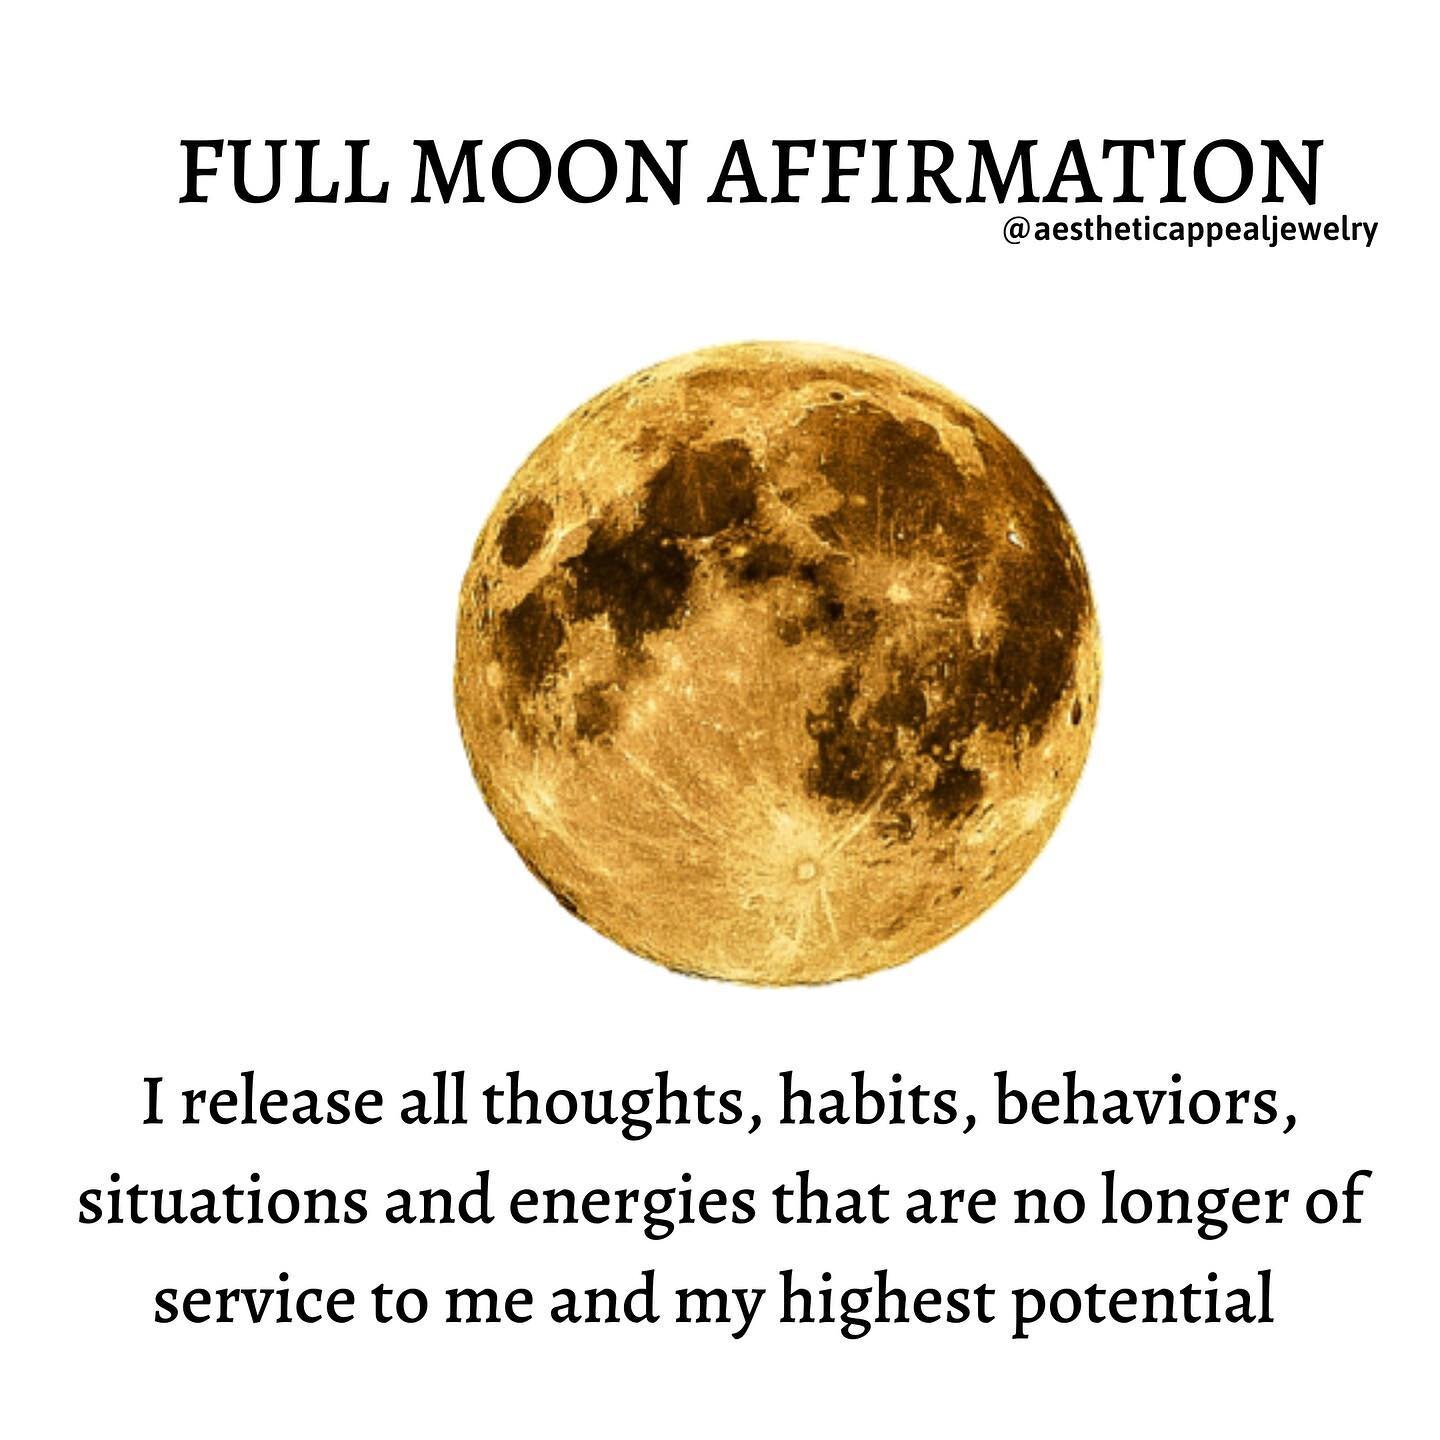 There is still time to charge your crystals under the current full moon in the sign of Pisces full moon 🌕 This is a perfect opportunity to recharge, realign, reset &amp; release ✨ 

Repeat this full moon affirmation throughout the day &amp; in your 